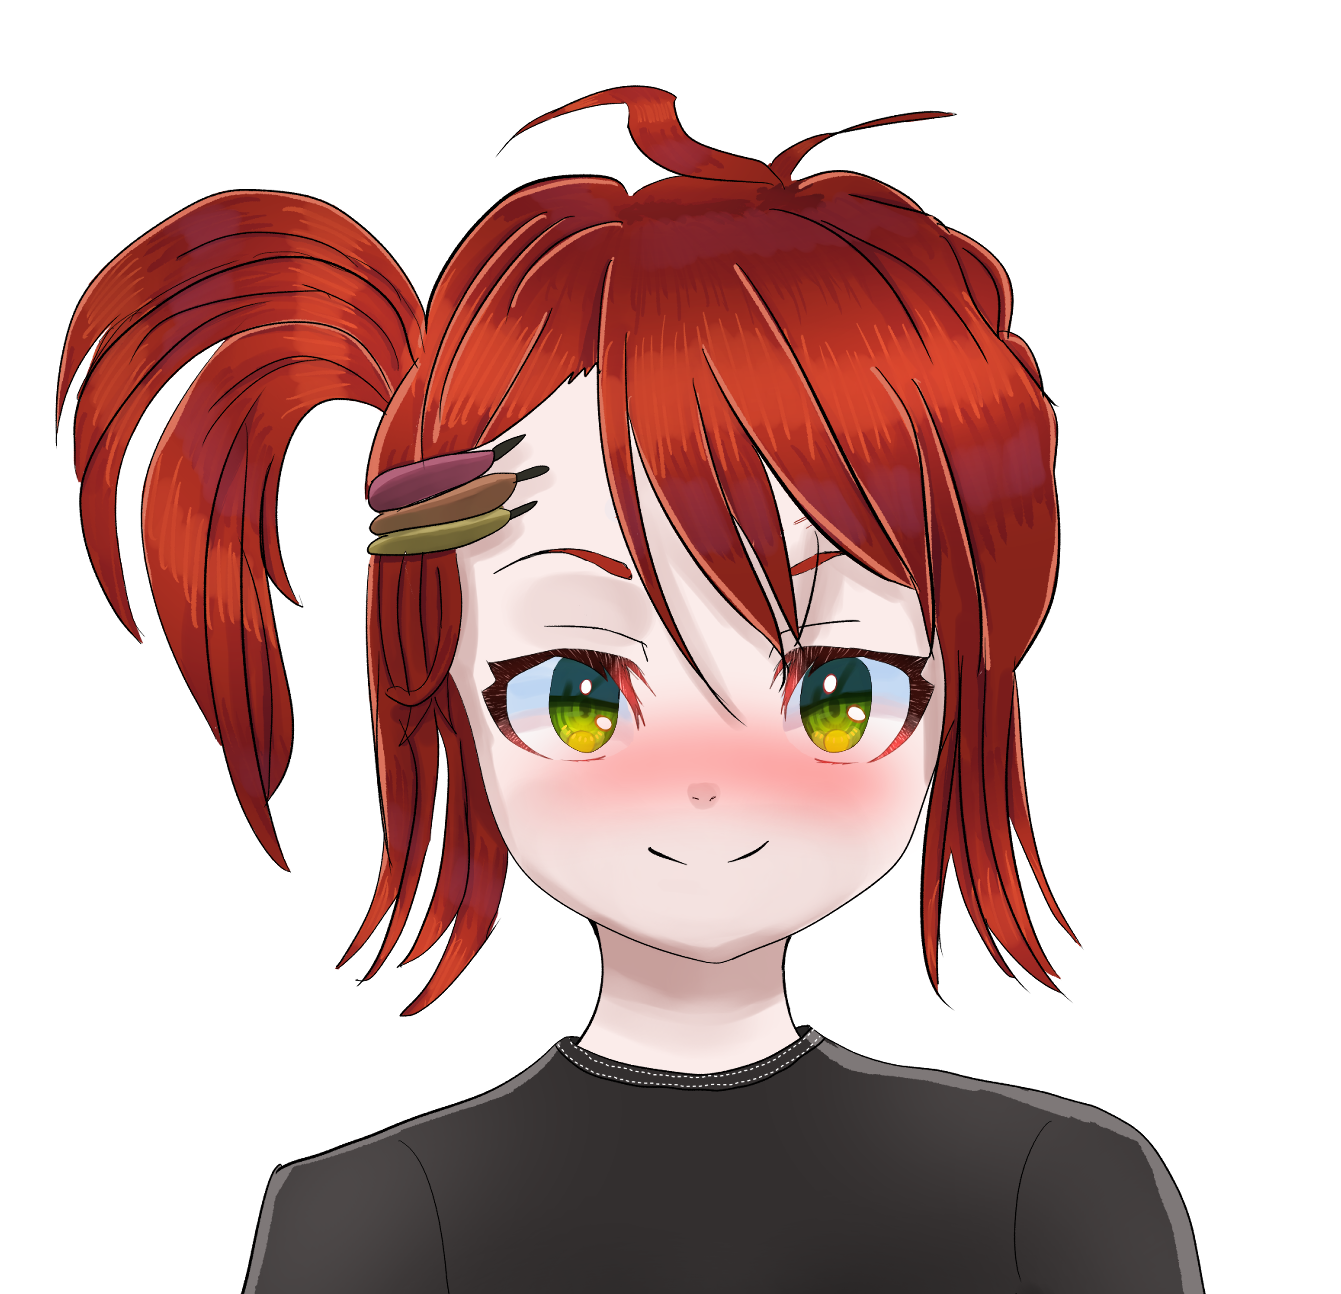 Anime girl sprite 30+ expressions yandere by Ynyan